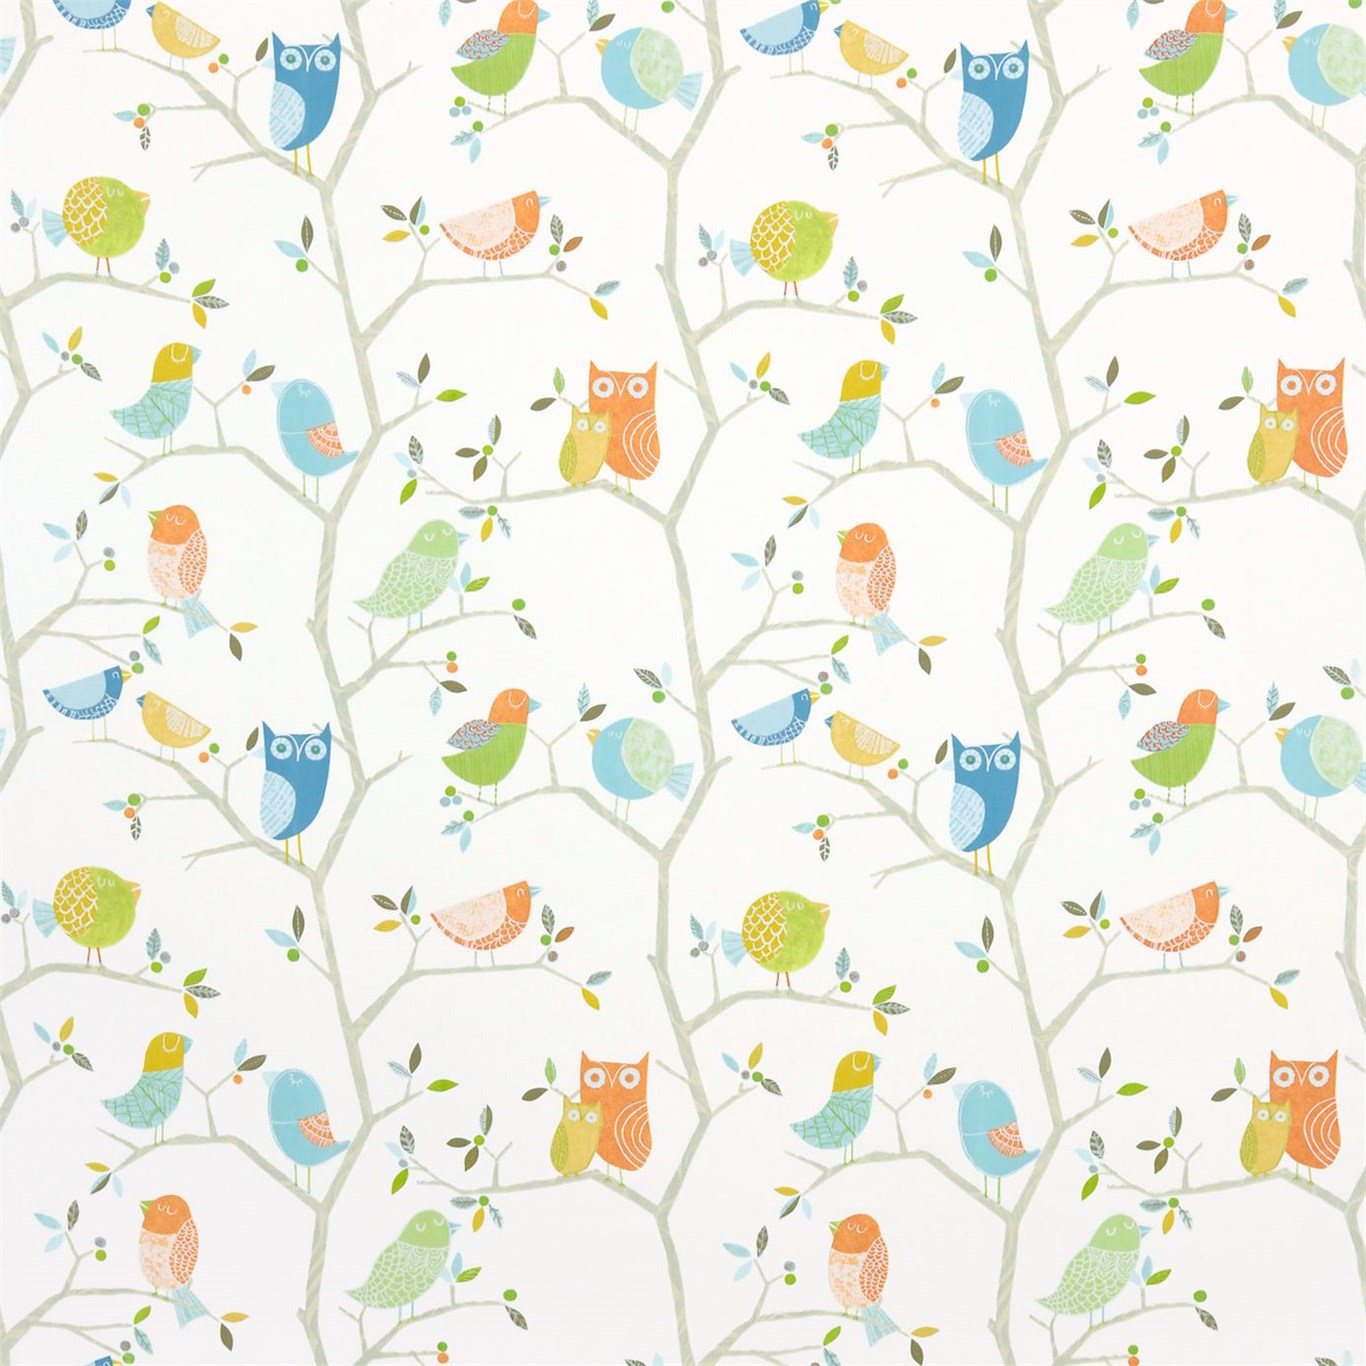 What A Hoot Aqua Tangerine Apple and Natural Fabric by Harlequin